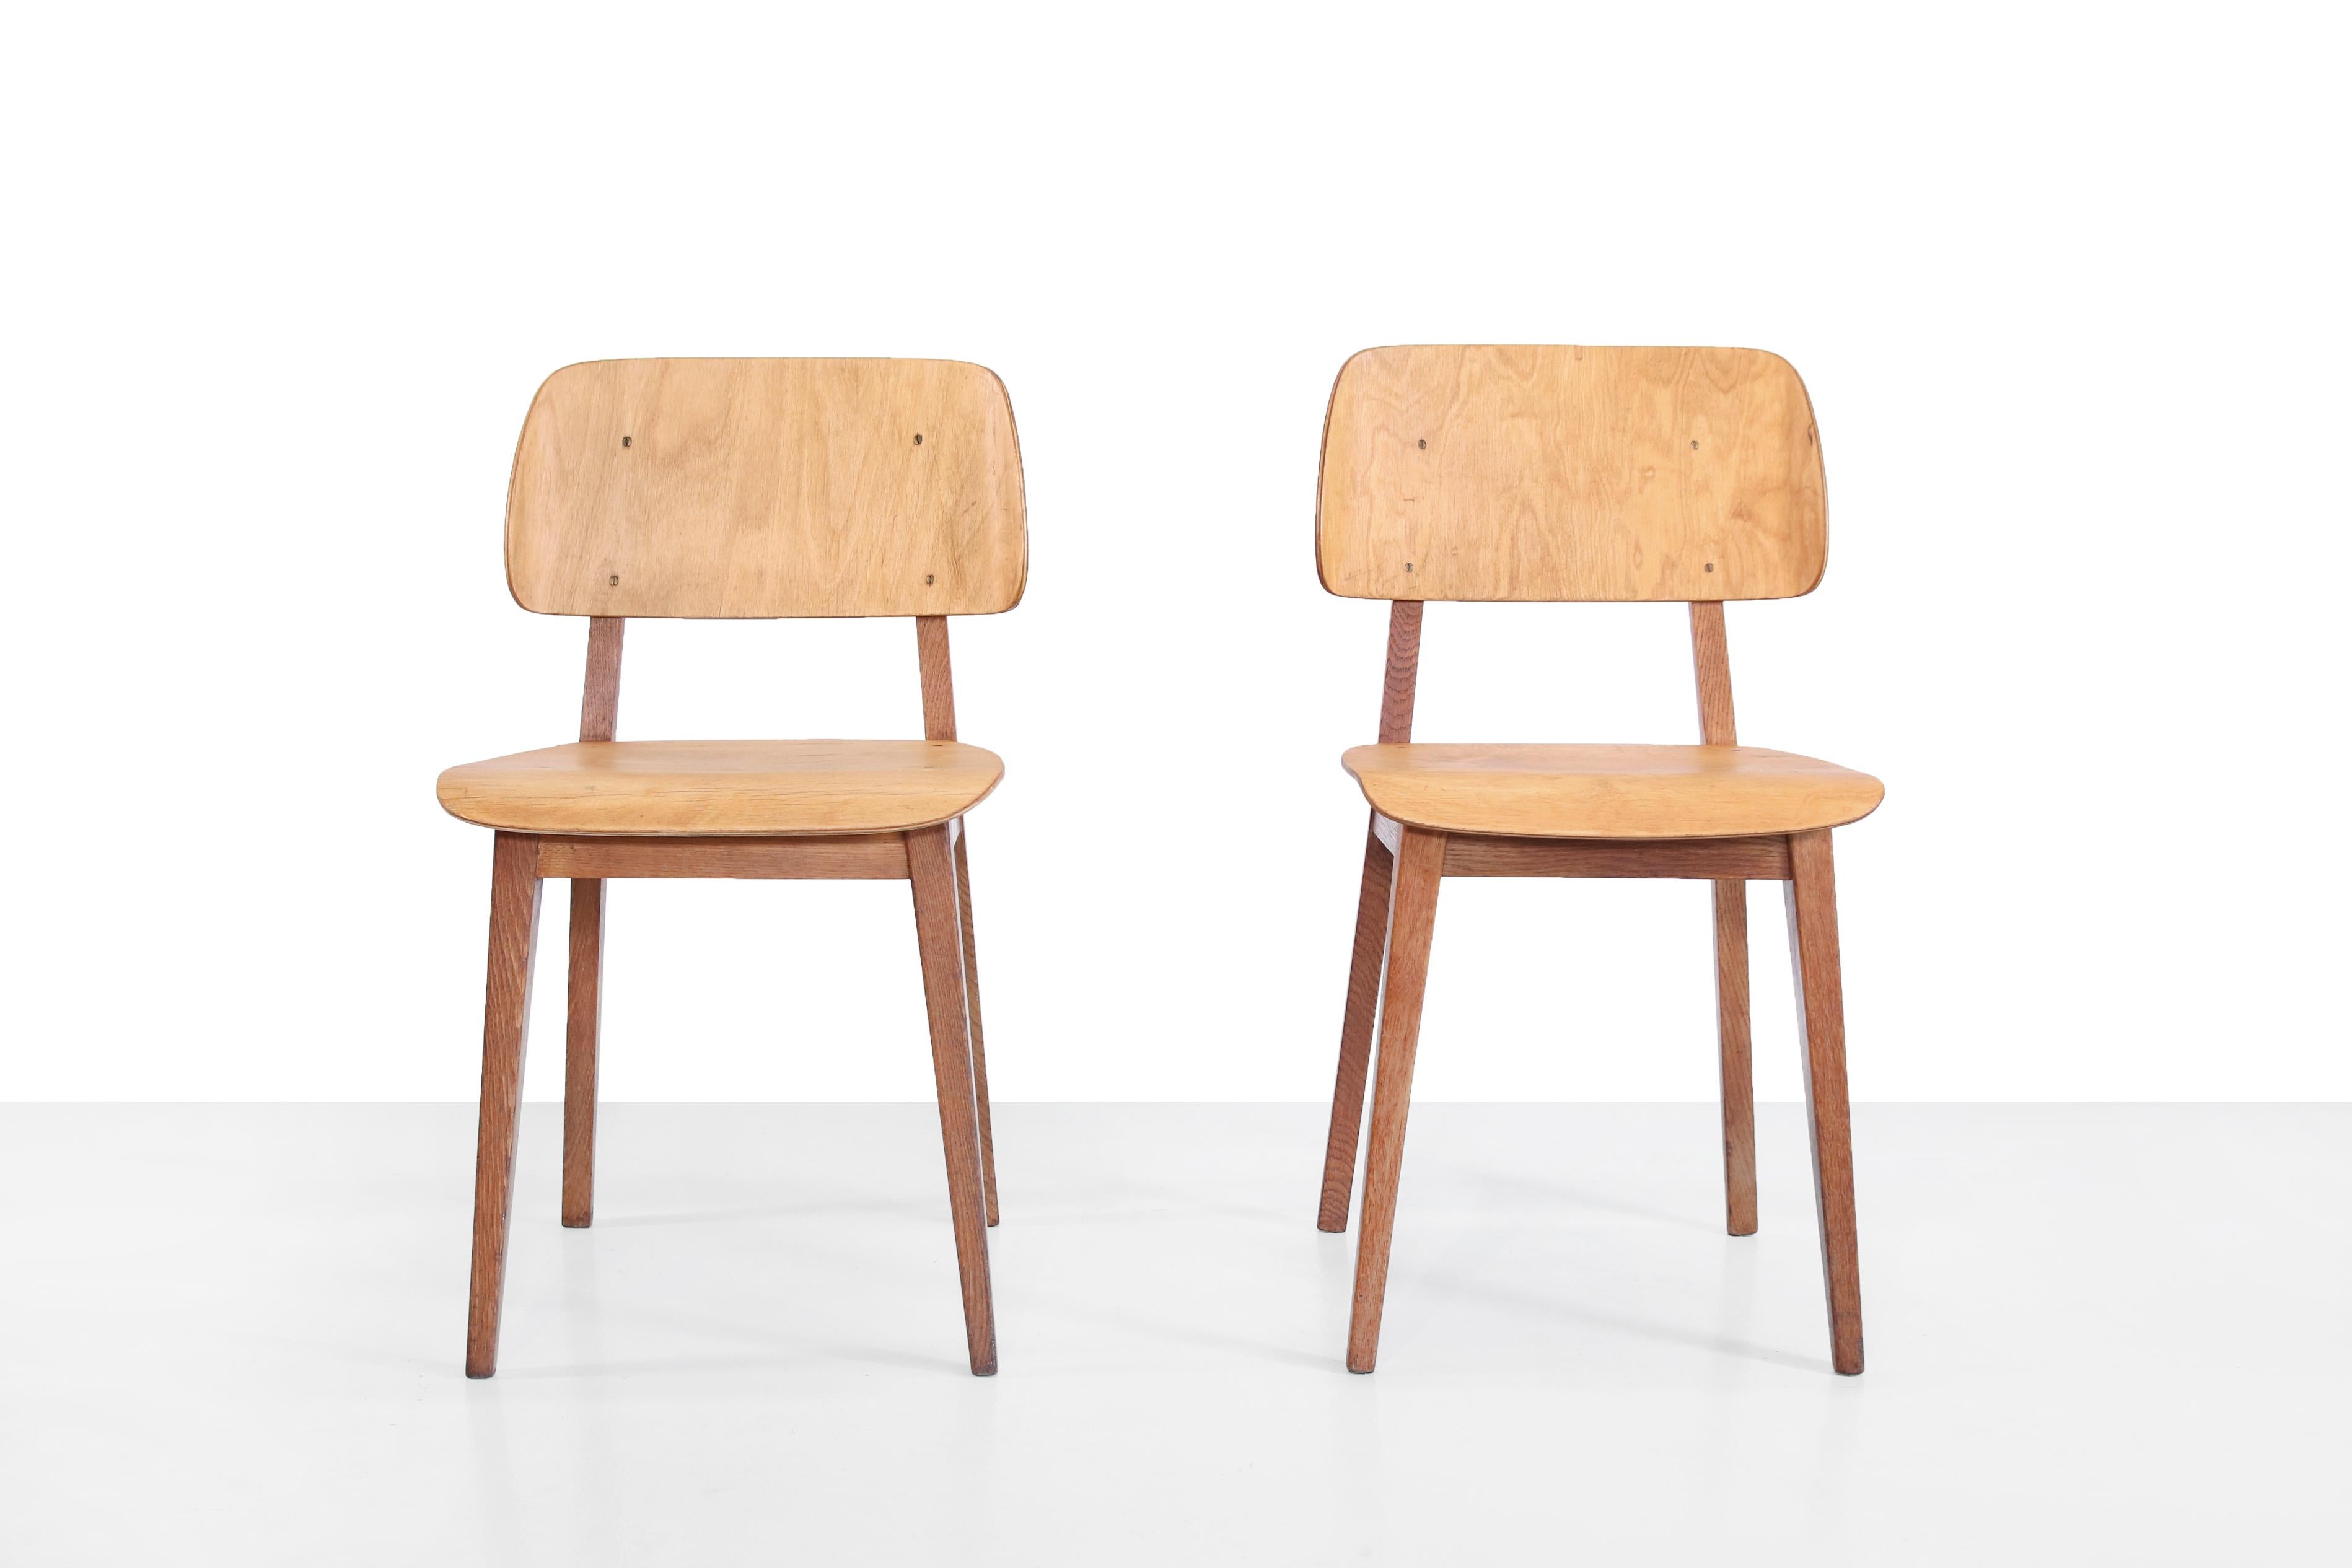 Beautiful rare Pastoe chairs designed by Dirk Braakman, the father of Cees Braakman in the 1940s. The chairs are made of solid oak and bent plywood. In our view the original old 'Standard chairs' from Dutch soil. The chairs have a seat height of 46